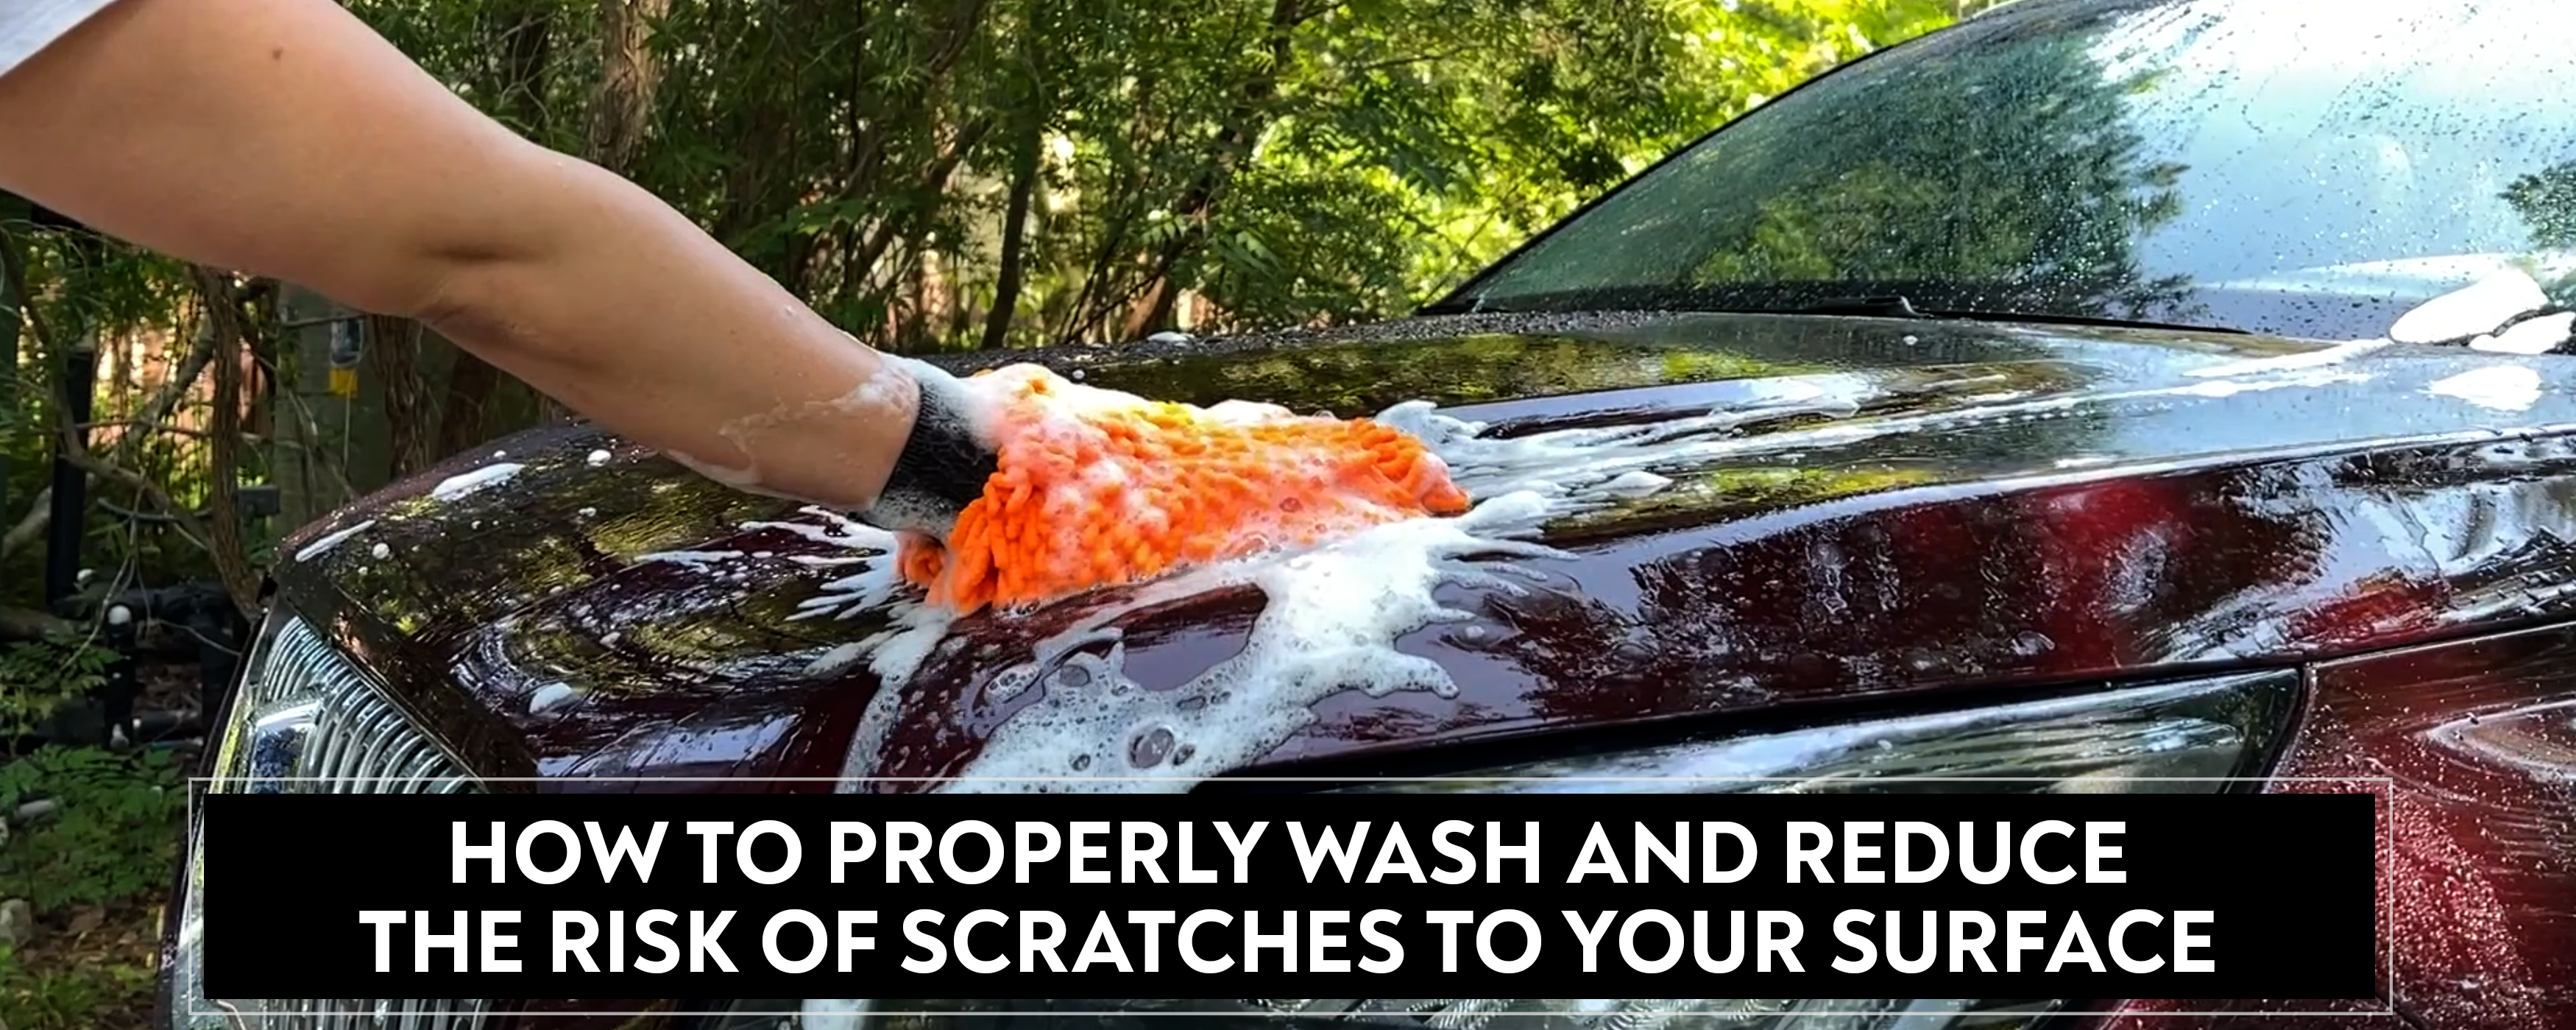 How To Properly Wash Your Vehicle and Reduce the Risk of Scratching the Paint Surface